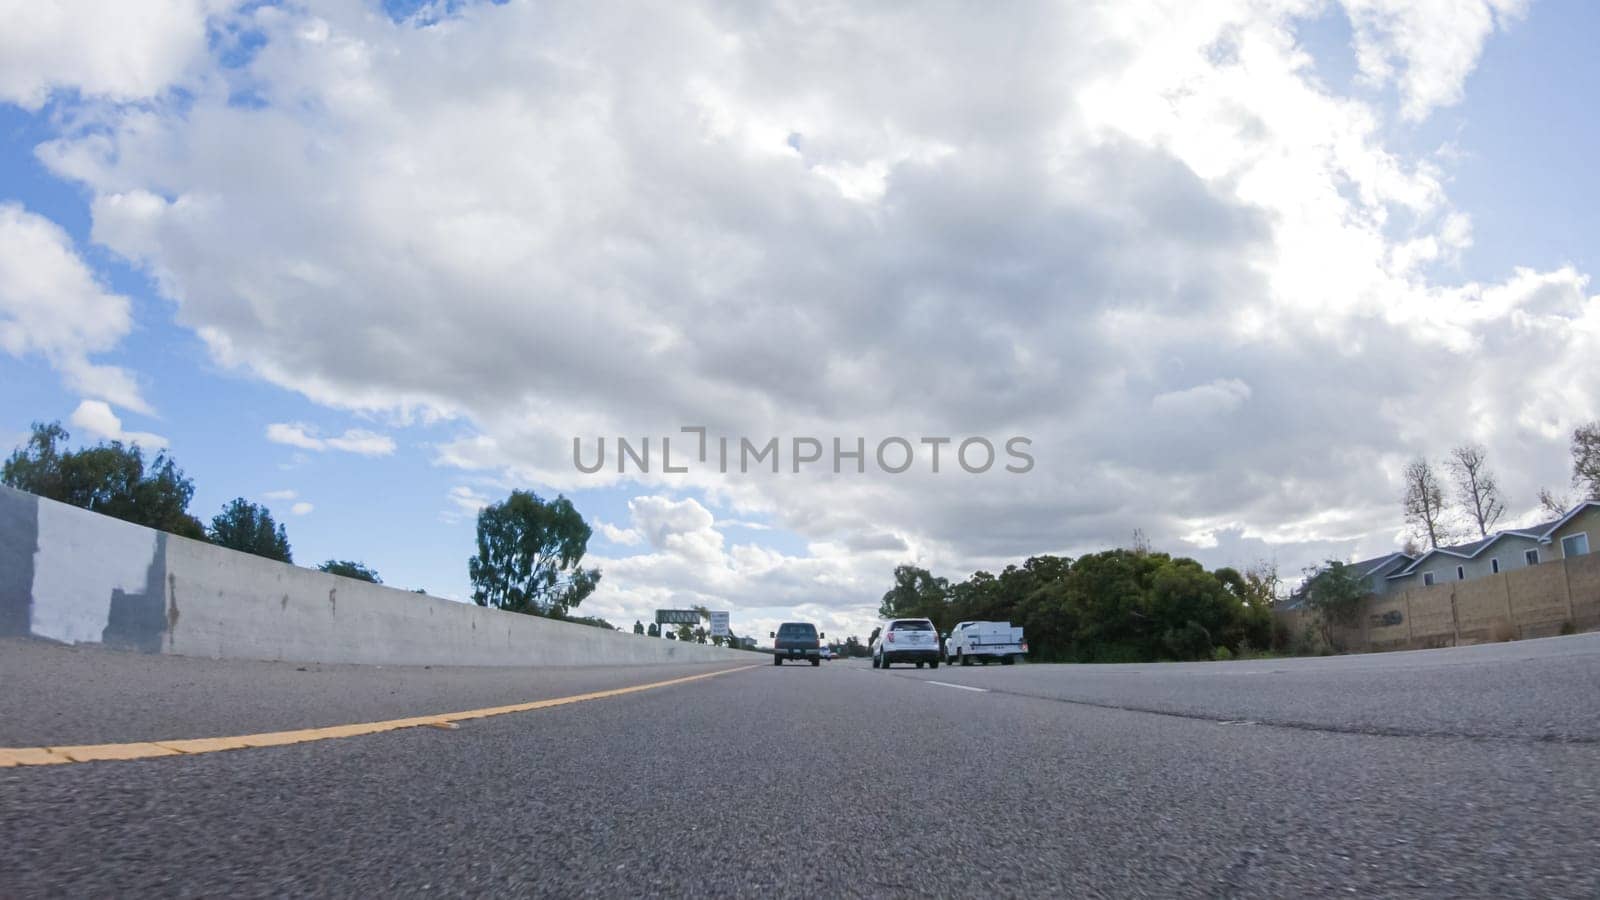 Santa Maria, California, USA-December 6, 2022-On a cloudy winter day, a car smoothly travels along Highway 101 near Santa Maria, California, under a cloudy sky, surrounded by a blend of greenery and golden hues.